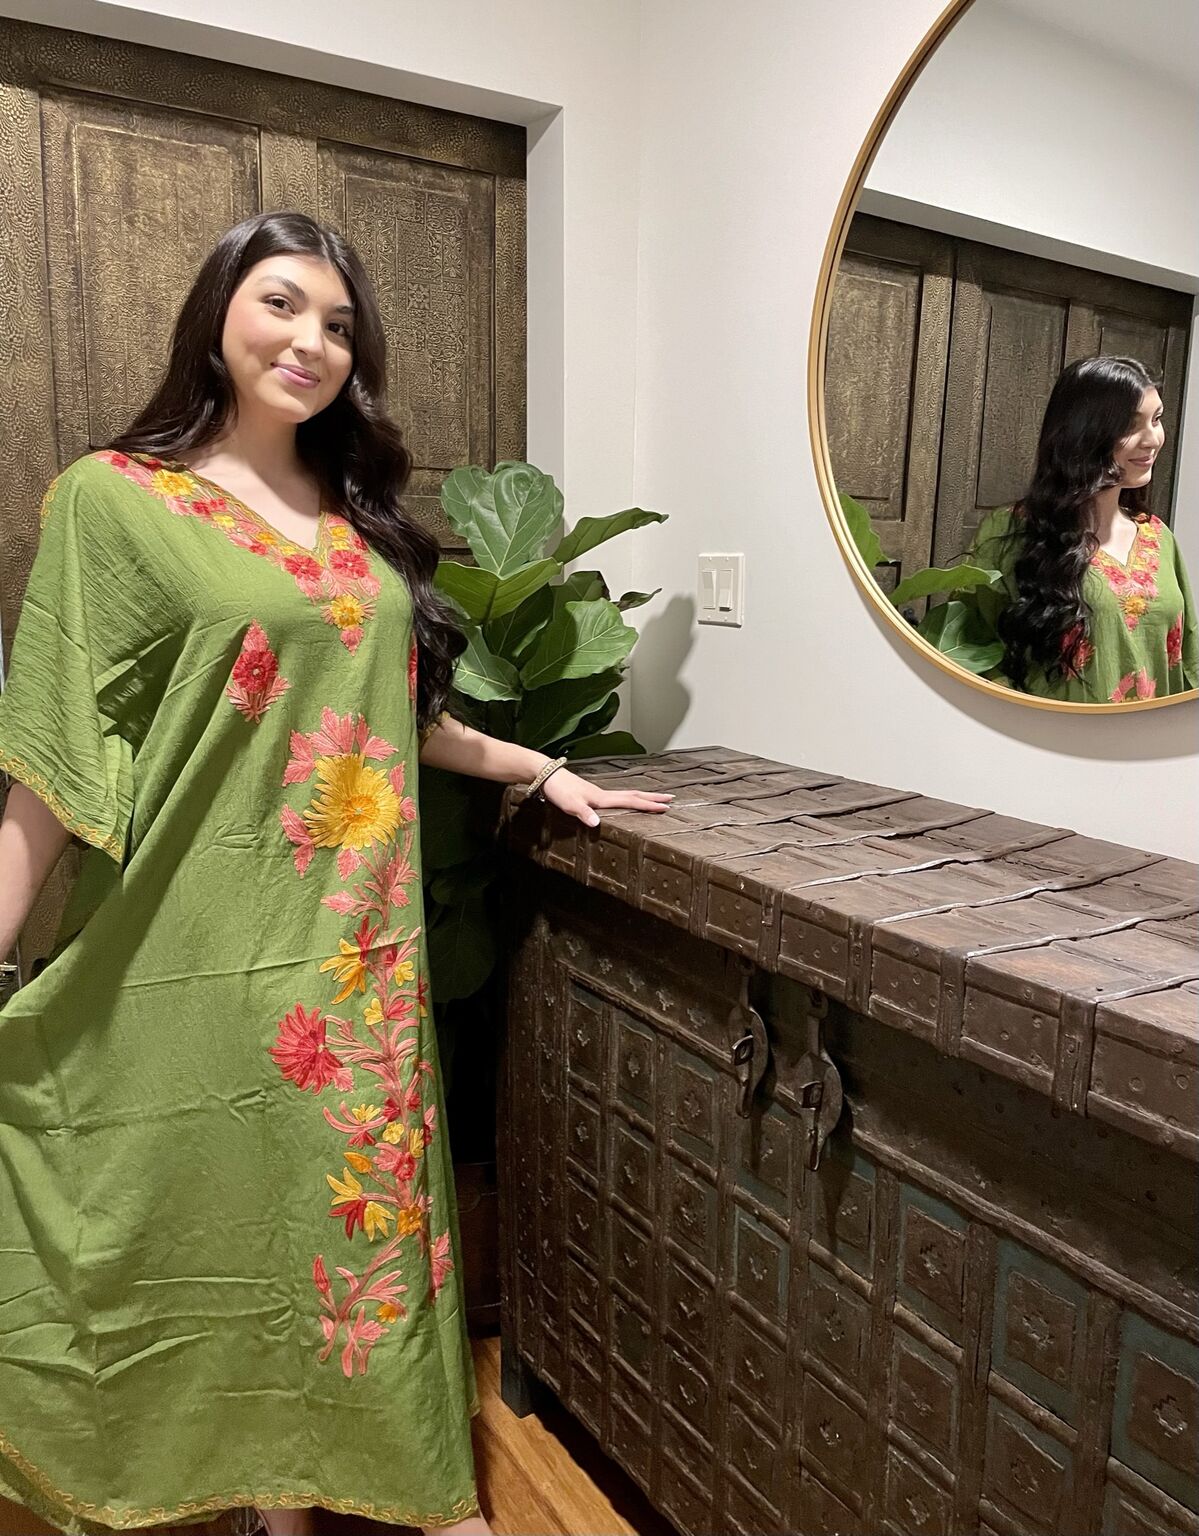 Mogul Interior on LinkedIn: The hand-embroidered caftan dresses feature ...